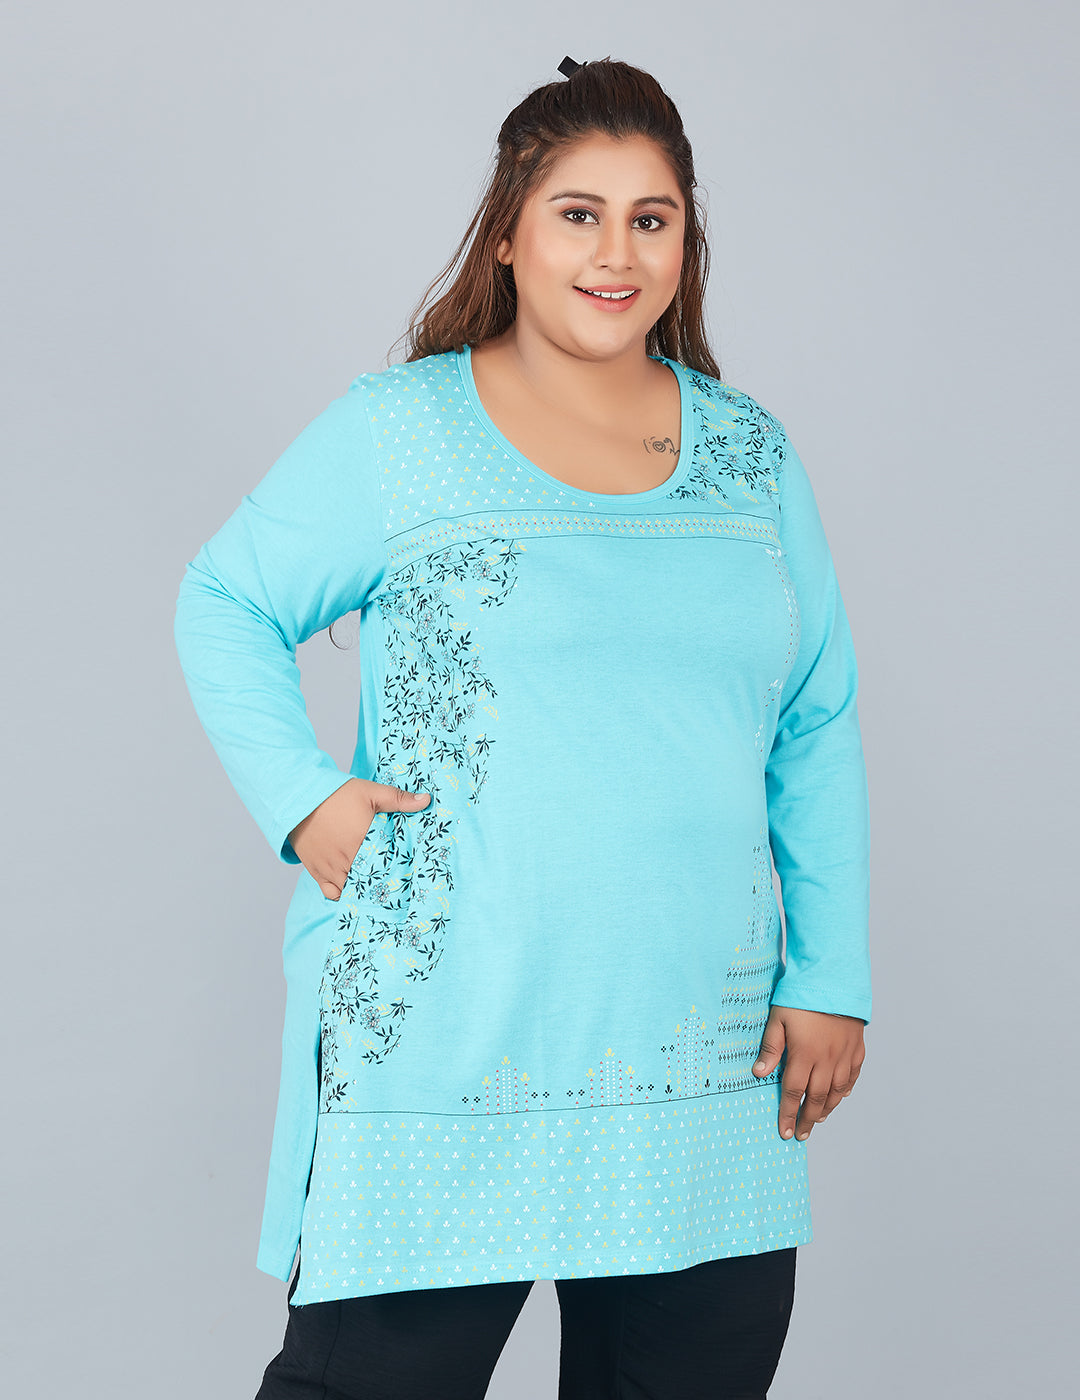 Plus Size Long T-shirts For Women - Half Sleeve - Turquoise 